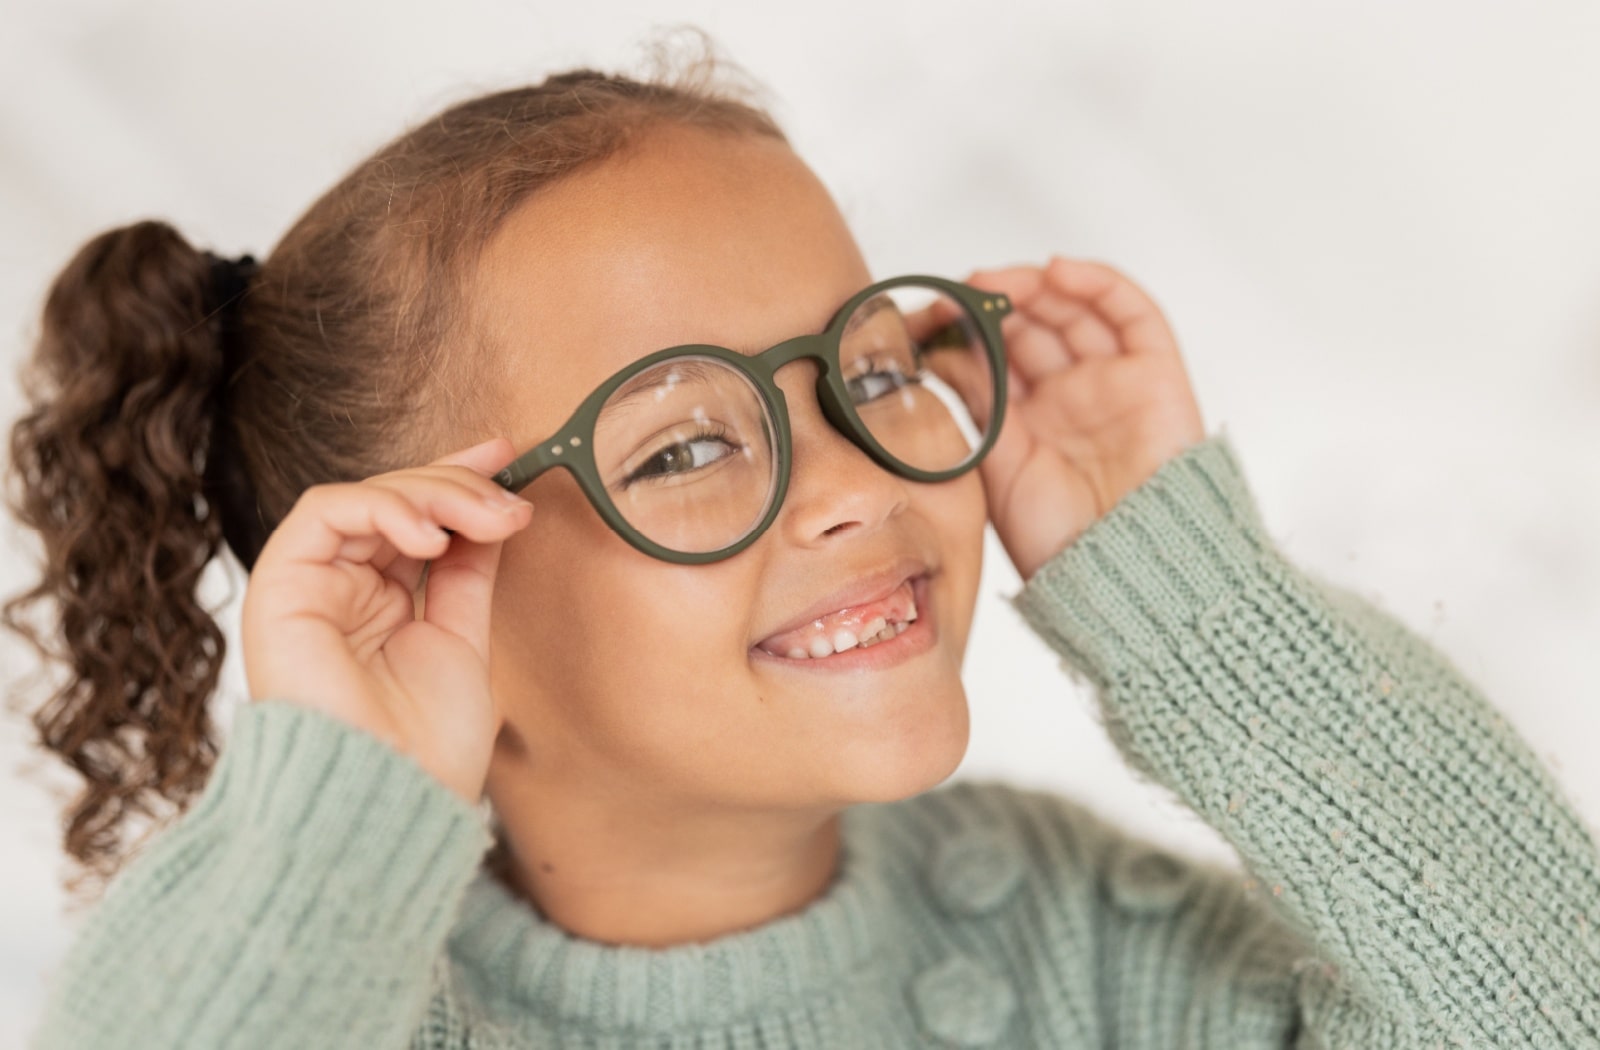 A young girl smiling and wearing corrective lens glasses